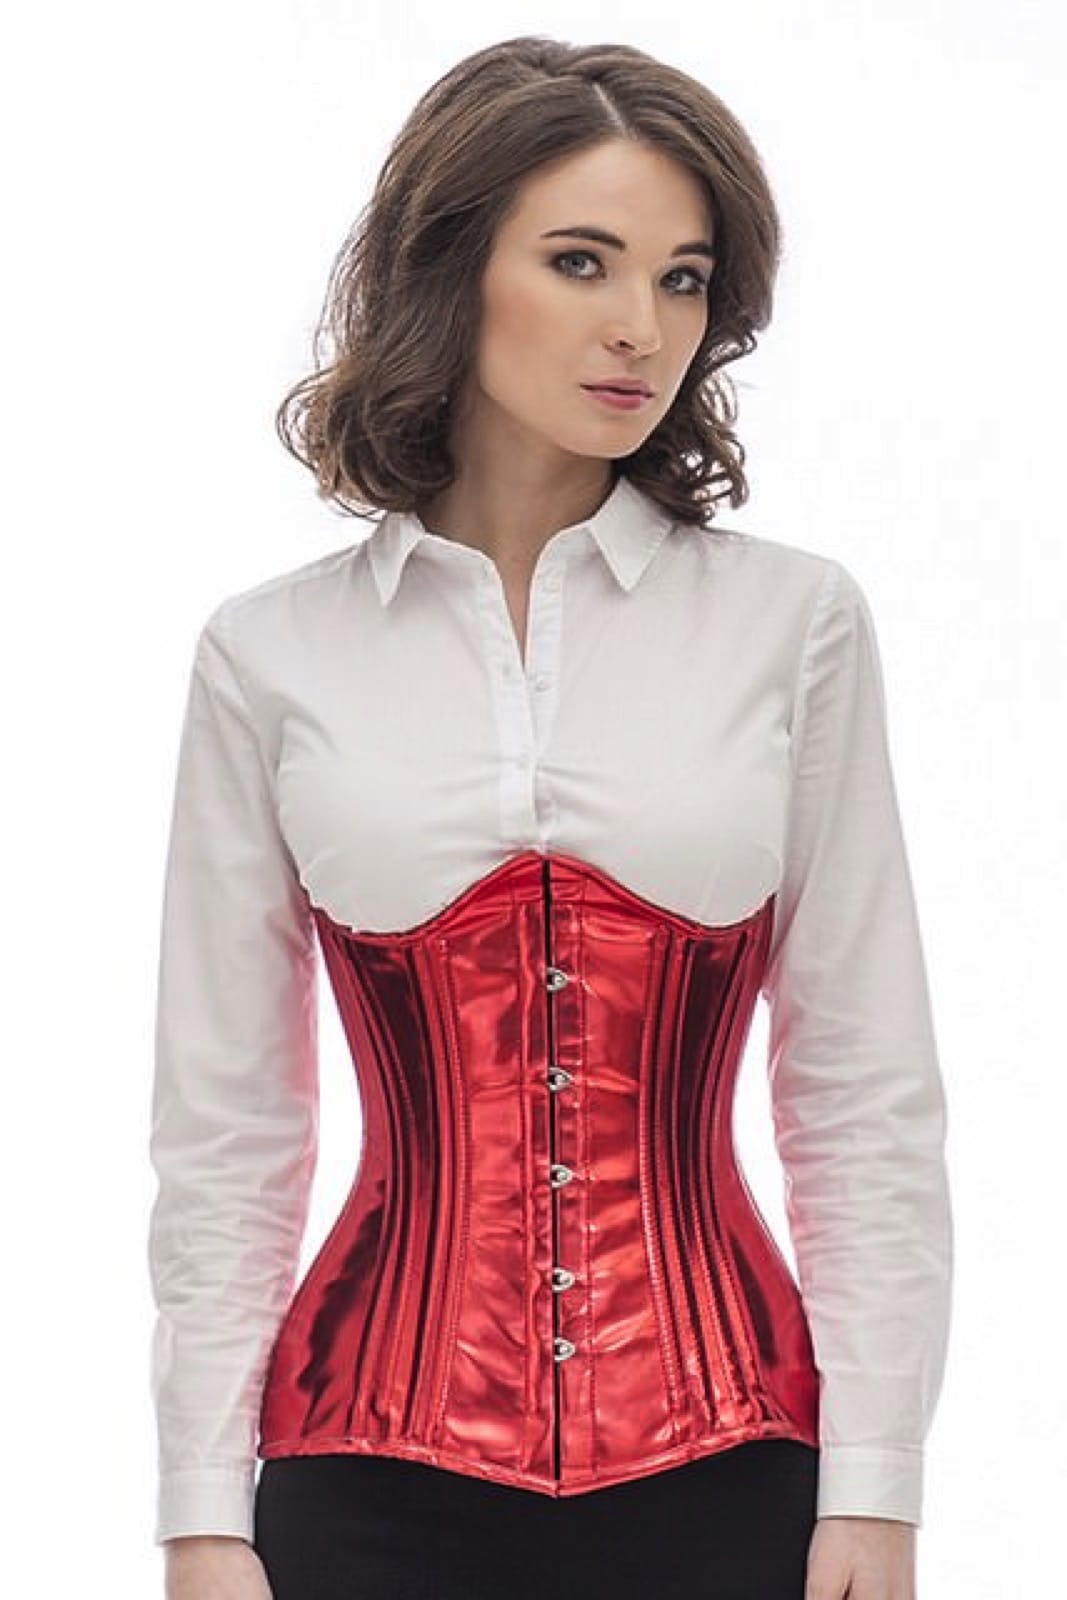 Corset red glitter vinyl curved underbust pnG1